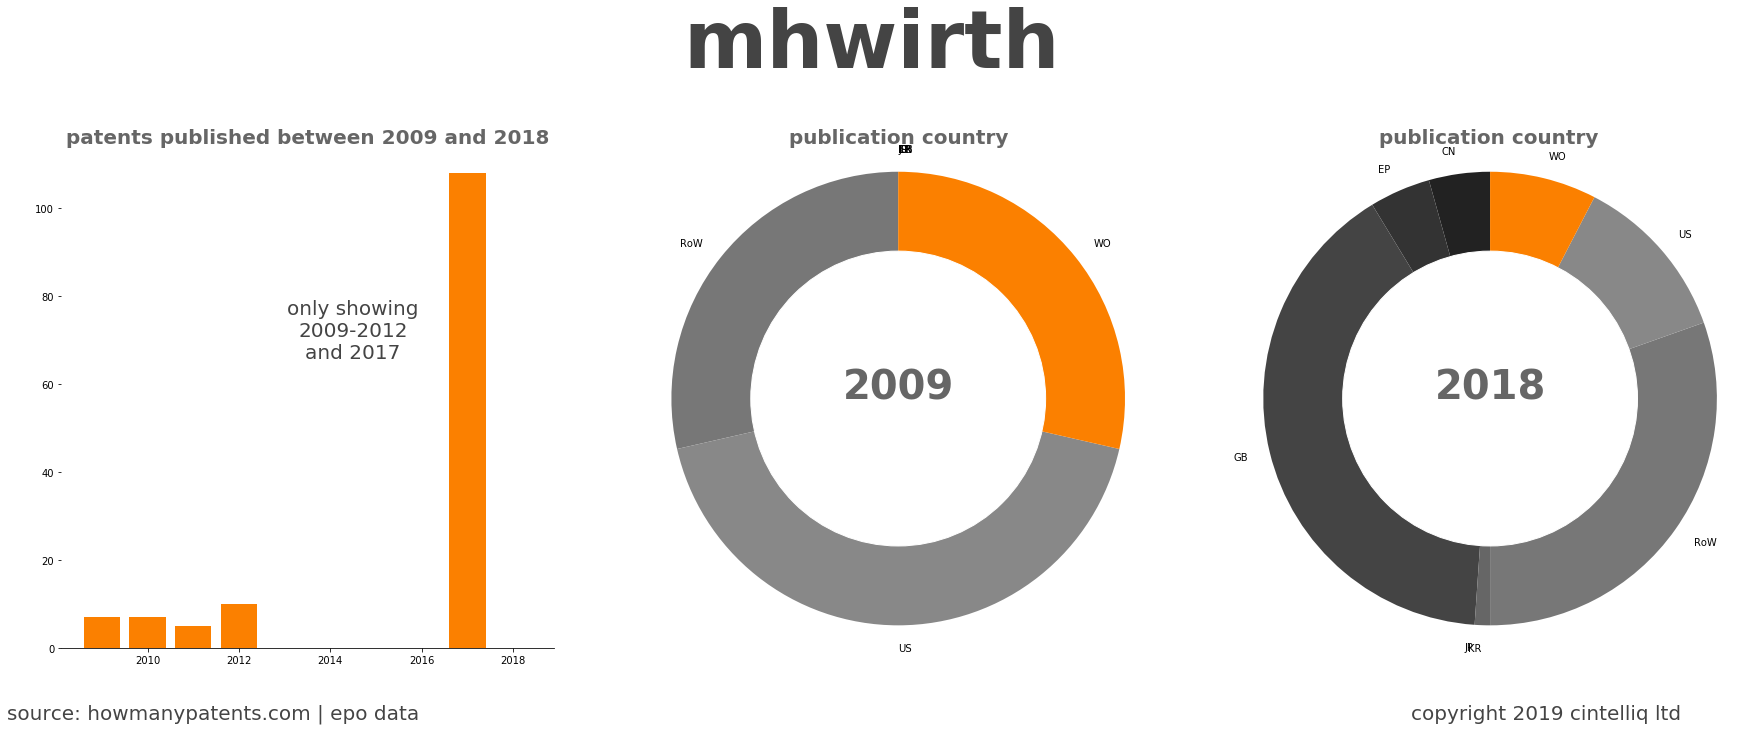 summary of patents for Mhwirth